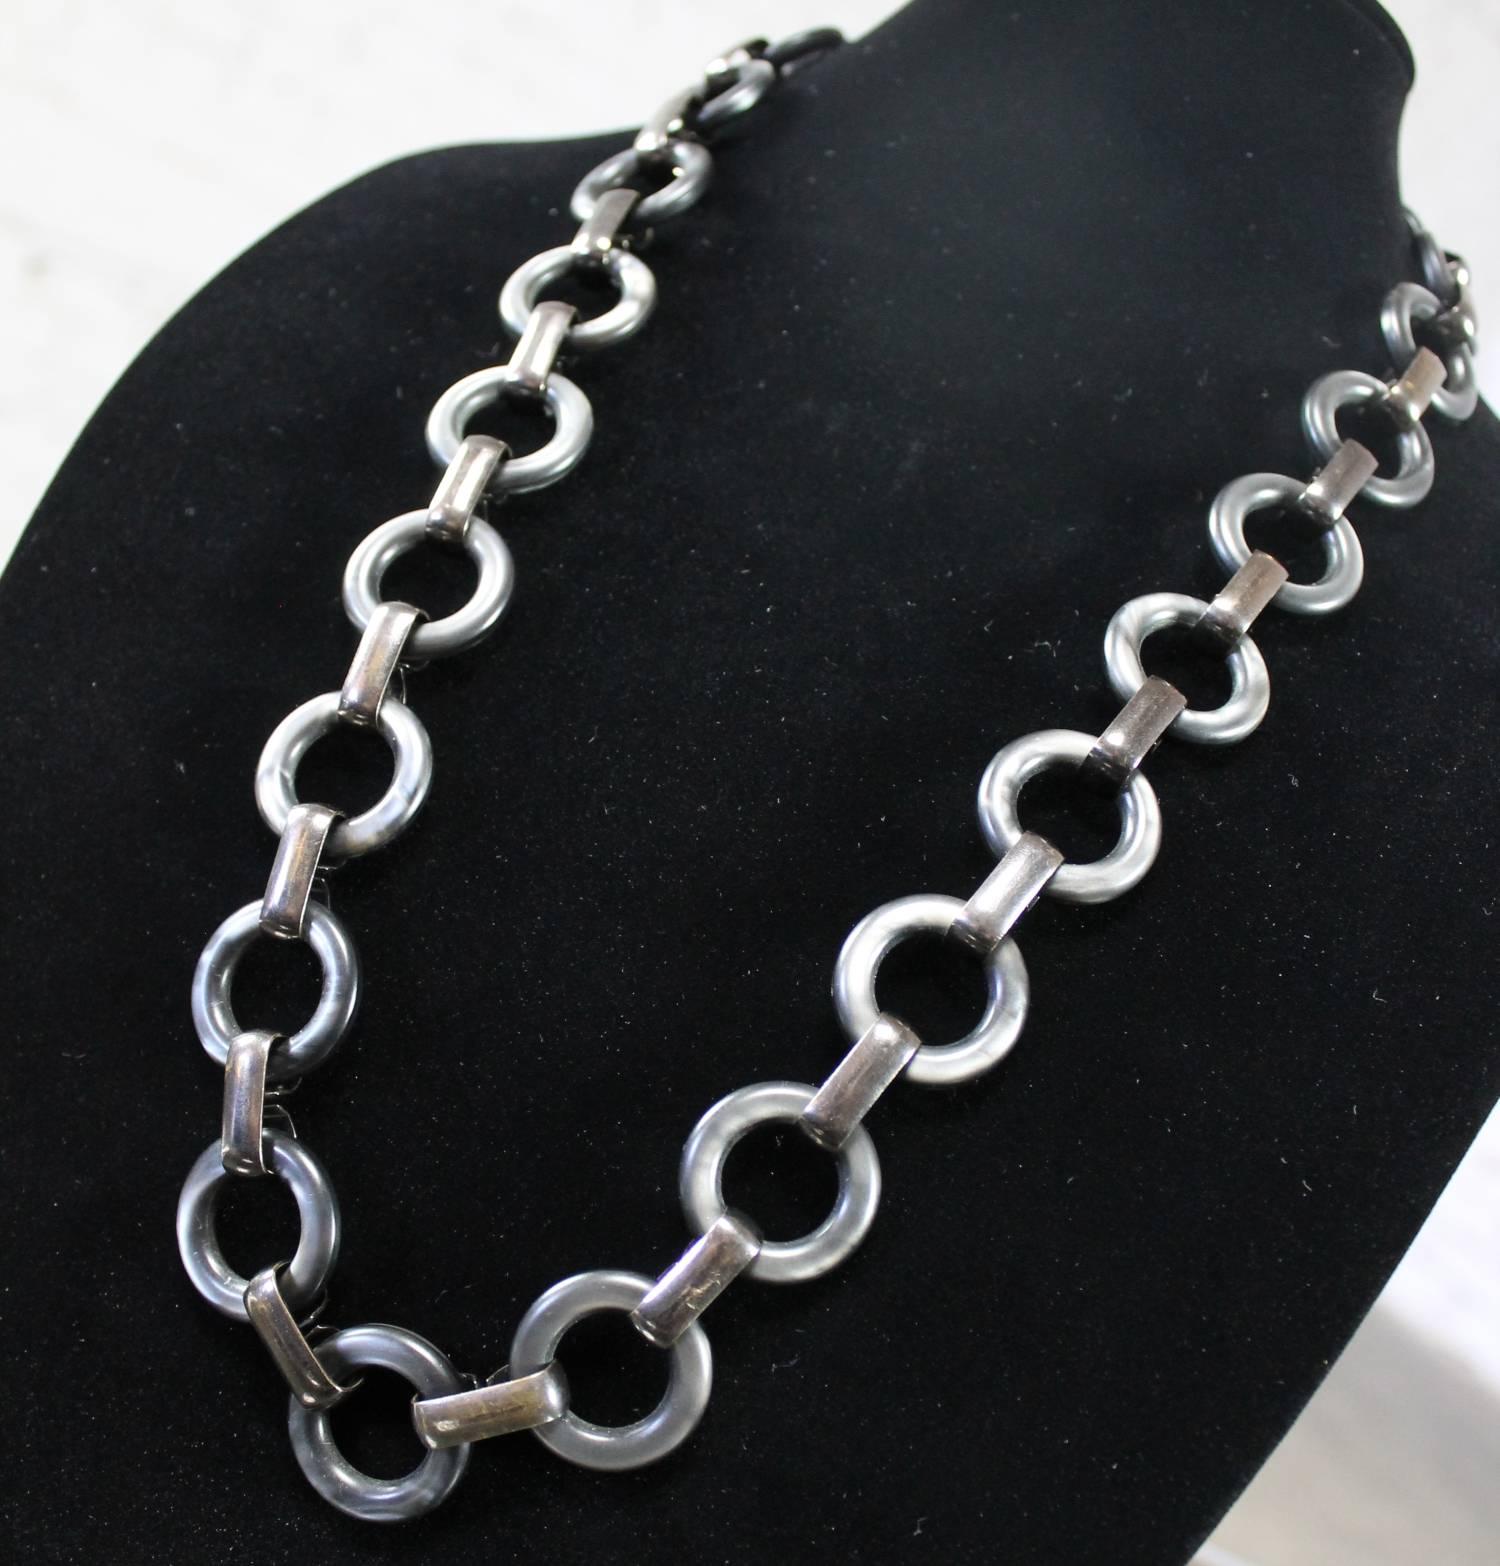 Handsome and versatile YSL (Yves Saint Laurent) chunky link necklace or belt of Lucite and metal in beautiful tones of pewter and gun-metal grey, circa 1960-1970s. This wonderful vintage piece is in like-new condition. We have found no outstanding